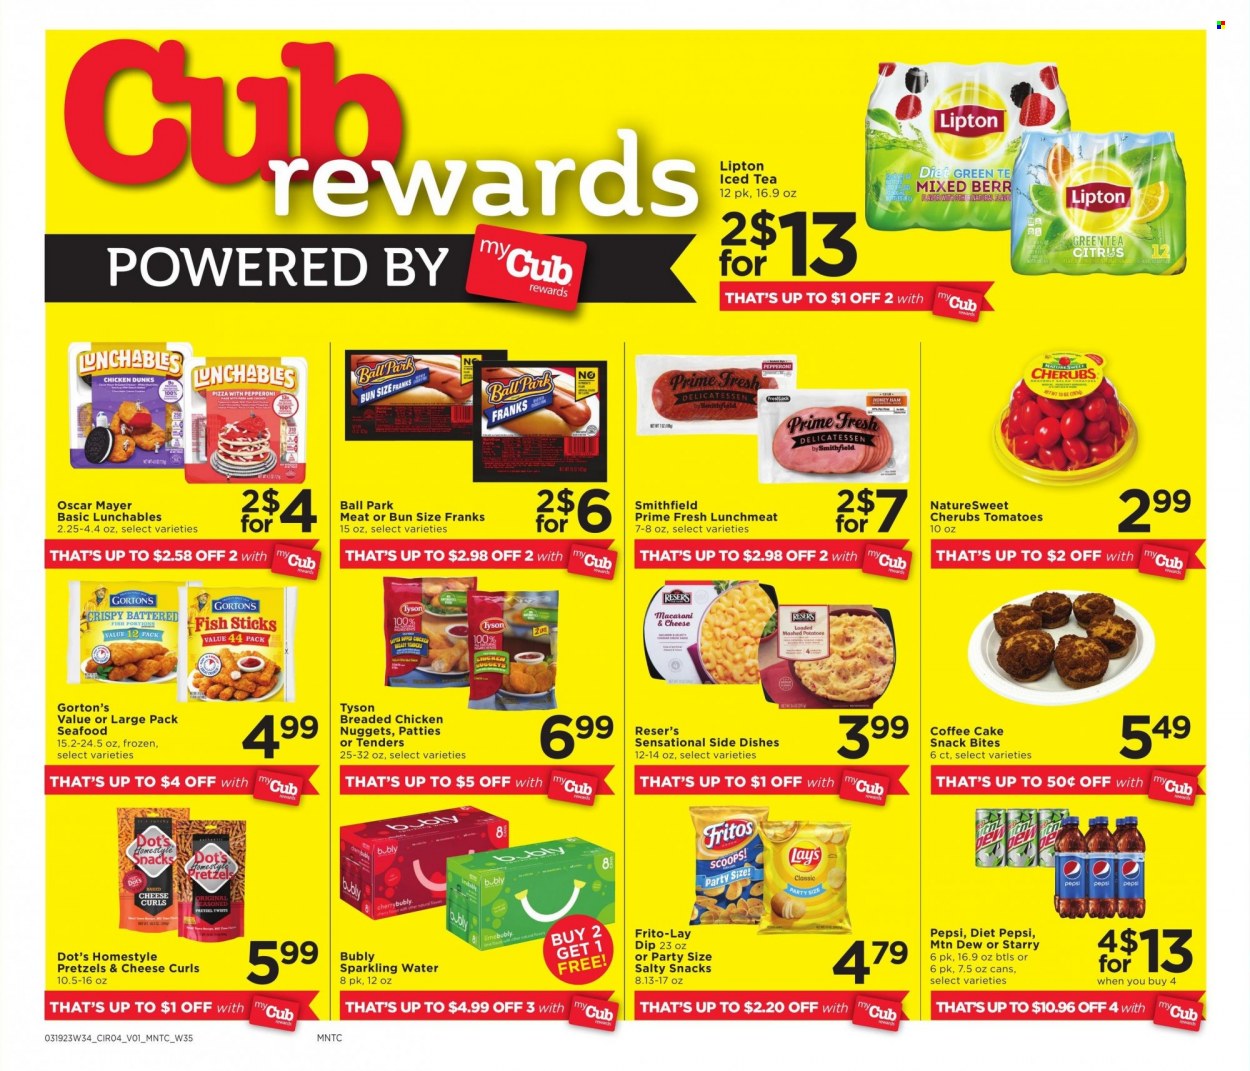 thumbnail - Cub Foods Flyer - 03/26/2023 - 04/01/2023 - Sales products - pretzels, cake, coffee cake, seafood, fish, fish fingers, Gorton's, fish sticks, macaroni & cheese, pizza, nuggets, fried chicken, chicken nuggets, Lunchables, Oscar Mayer, pepperoni, lunch meat, dip, snack, Fritos, Lay’s, Frito-Lay, Mountain Dew, Pepsi, Lipton, ice tea, Diet Pepsi, sparkling water, water, green tea, chicken. Page 6.